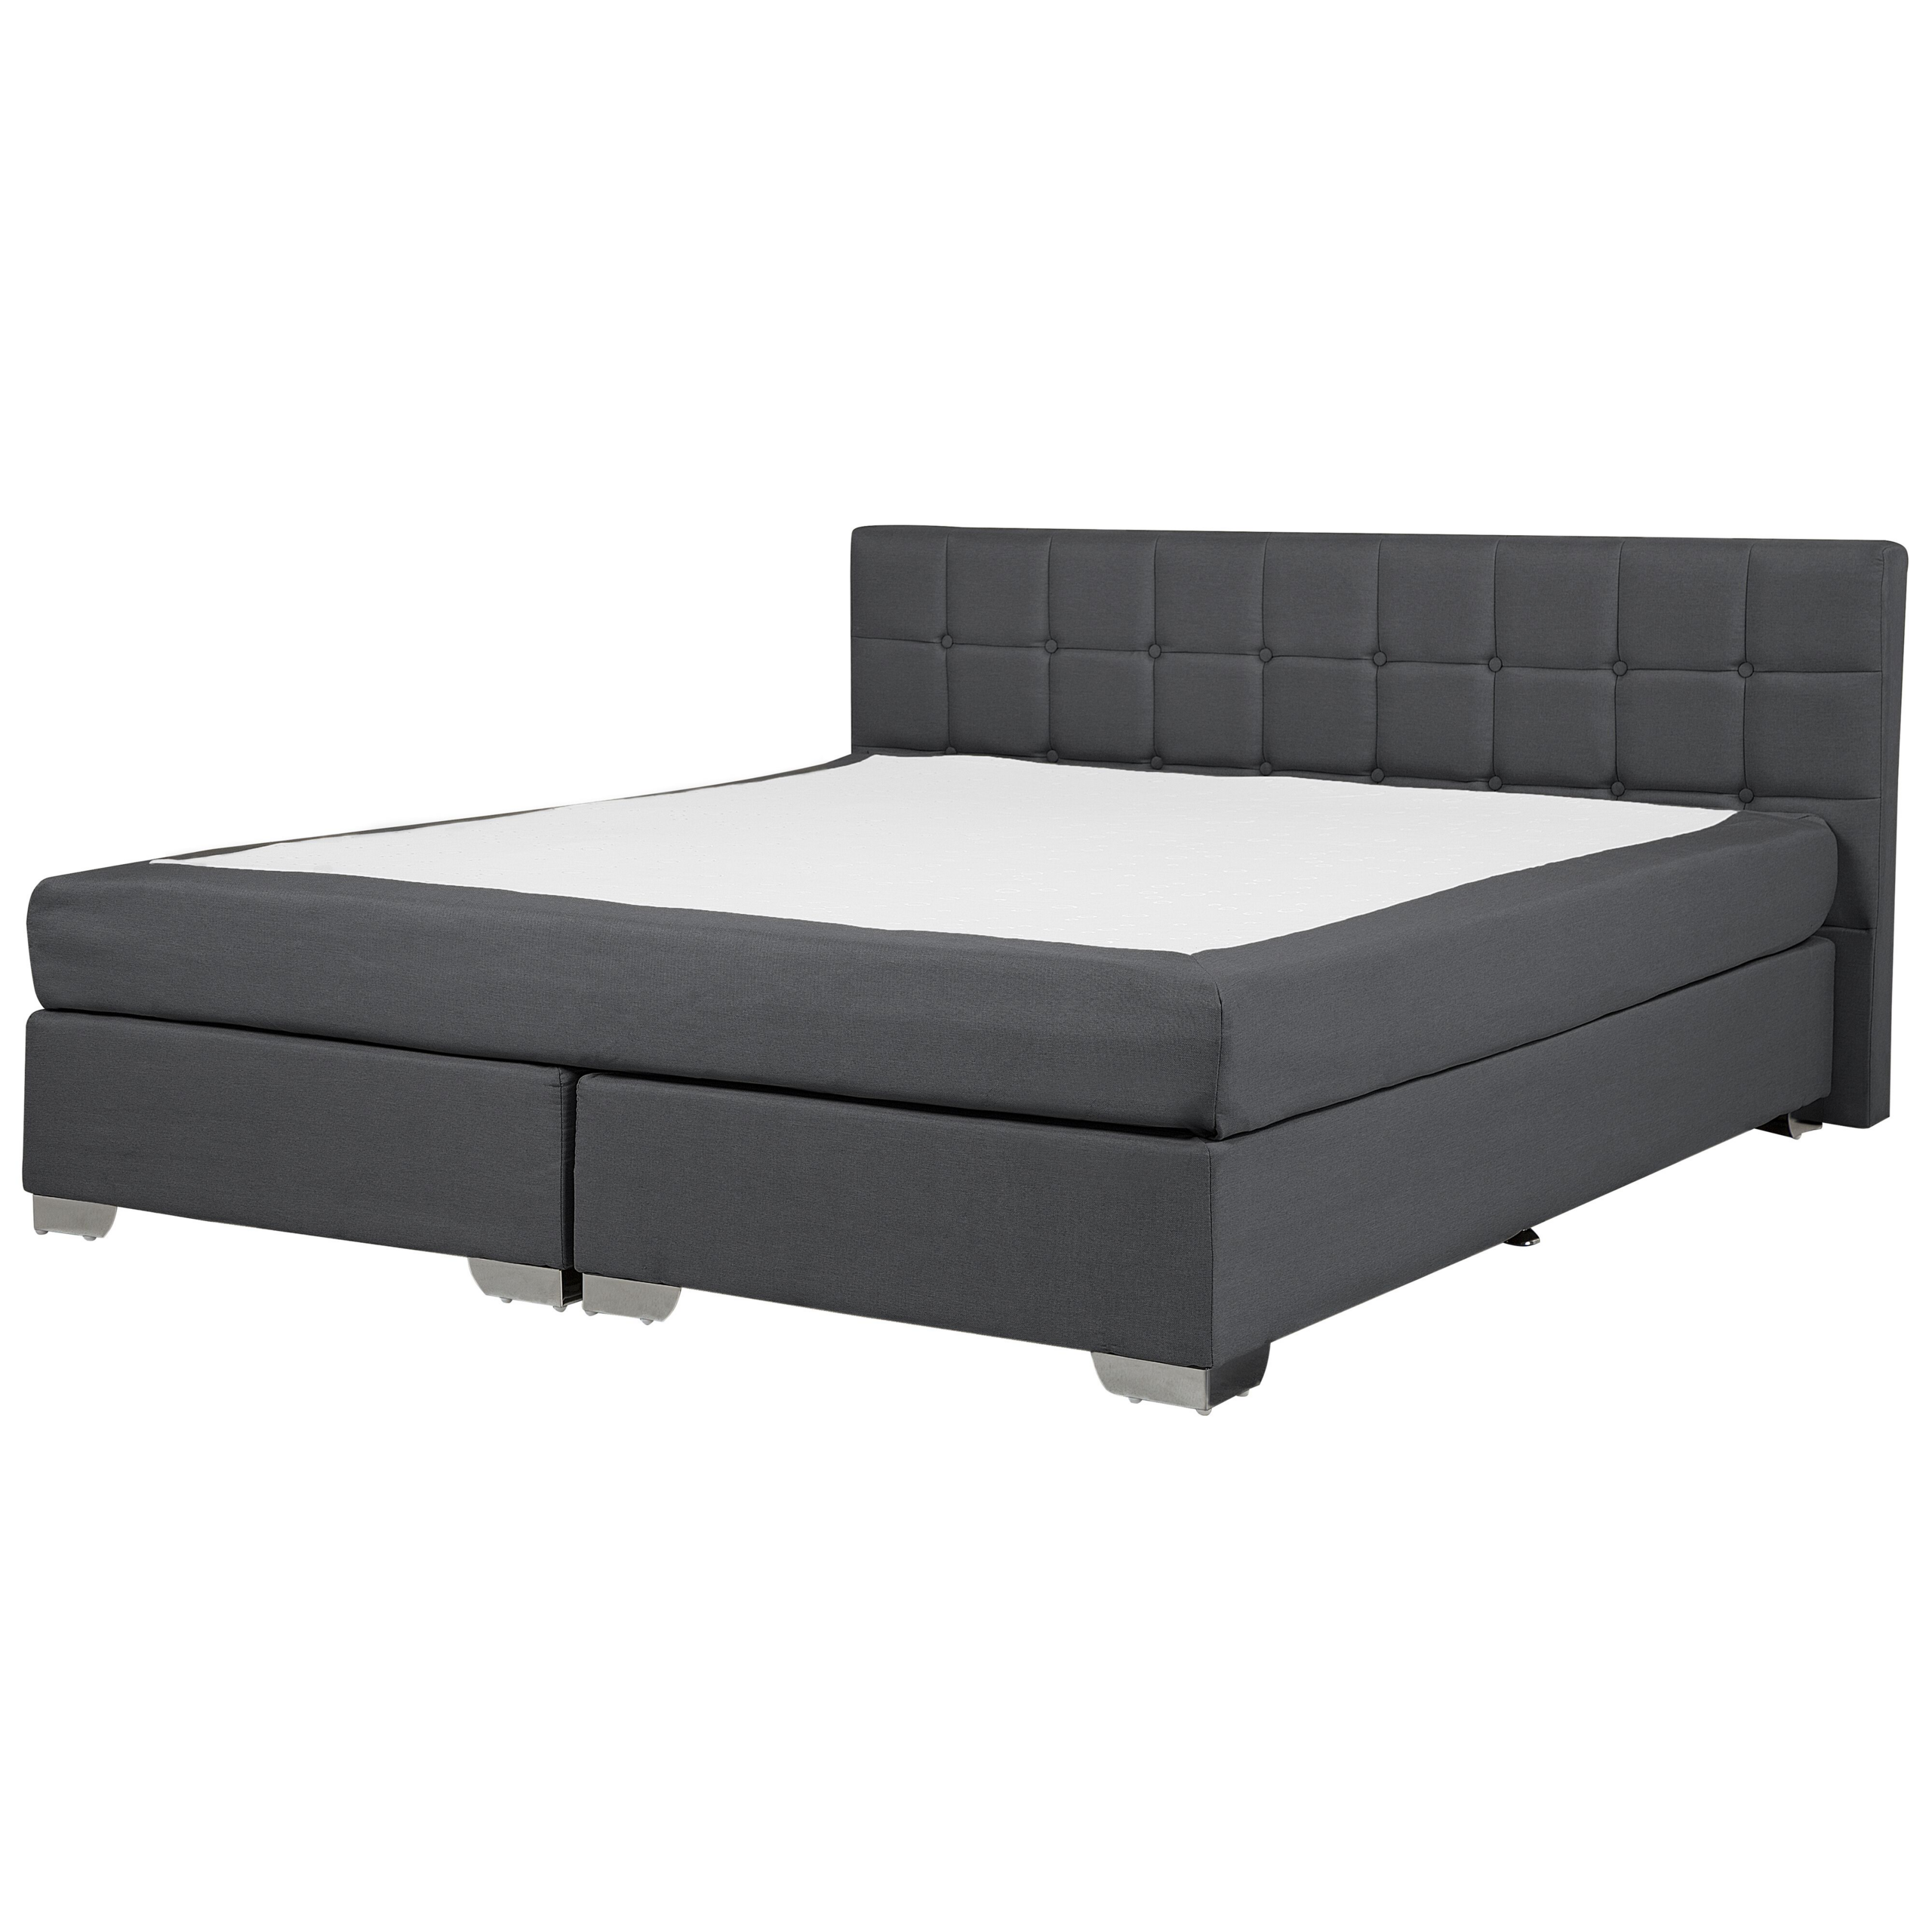 Beliani EU Super King Size Divan Bed Dark Grey Fabric Upholstered 6ft Frame with Tufted Headboard and Mattress